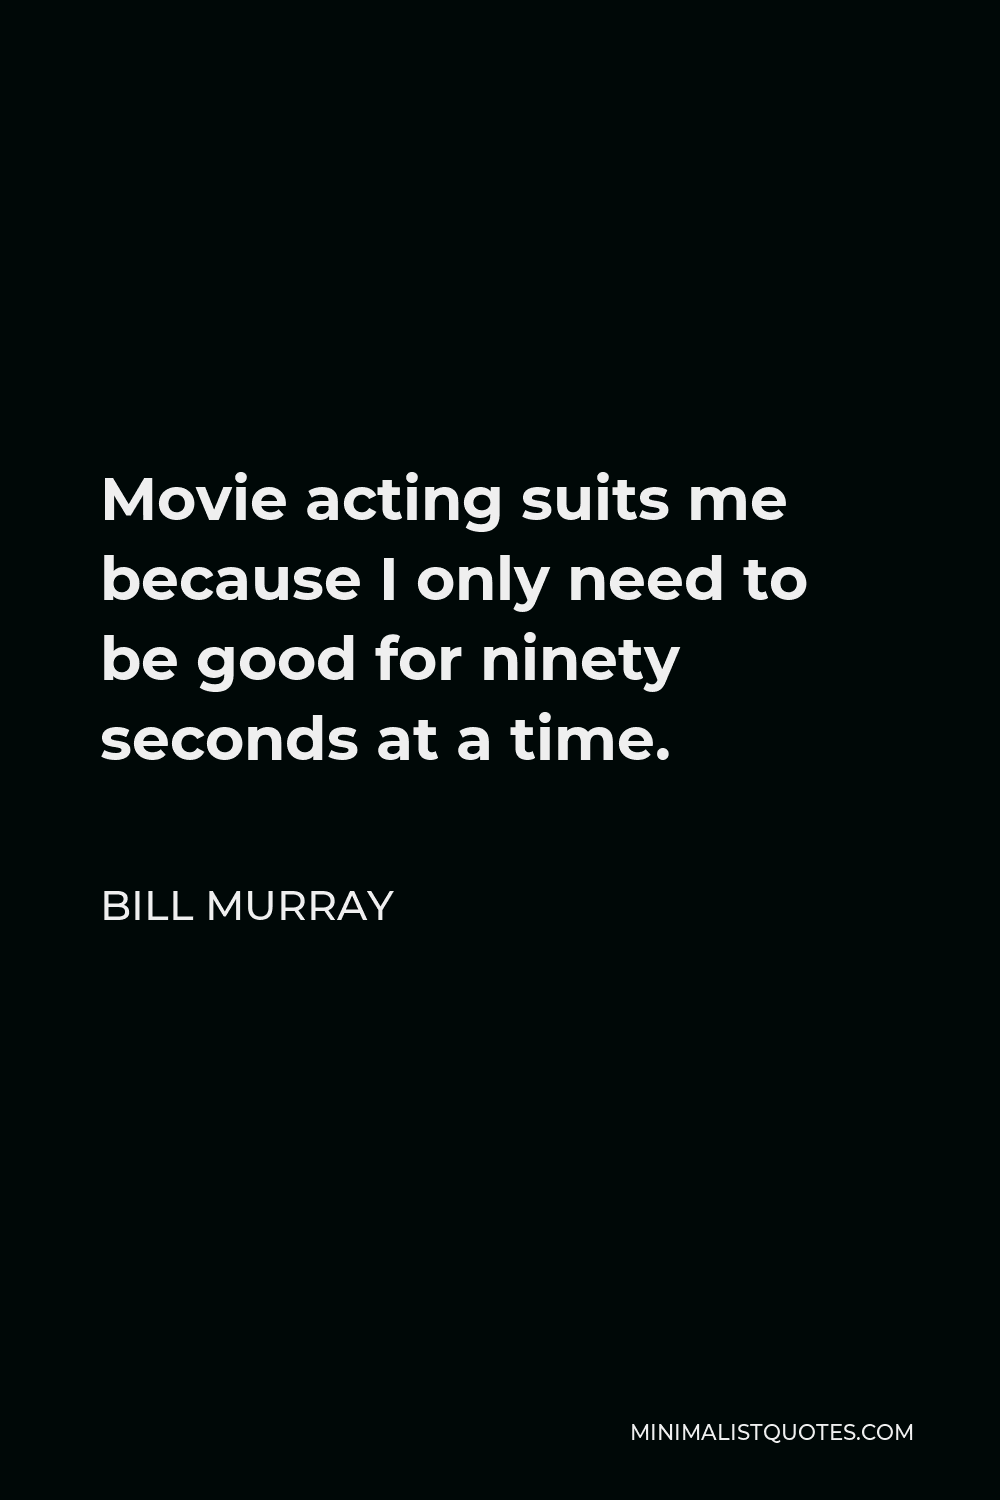 bill-murray-quote-movie-acting-suits-me-because-i-only-need-to-be-good